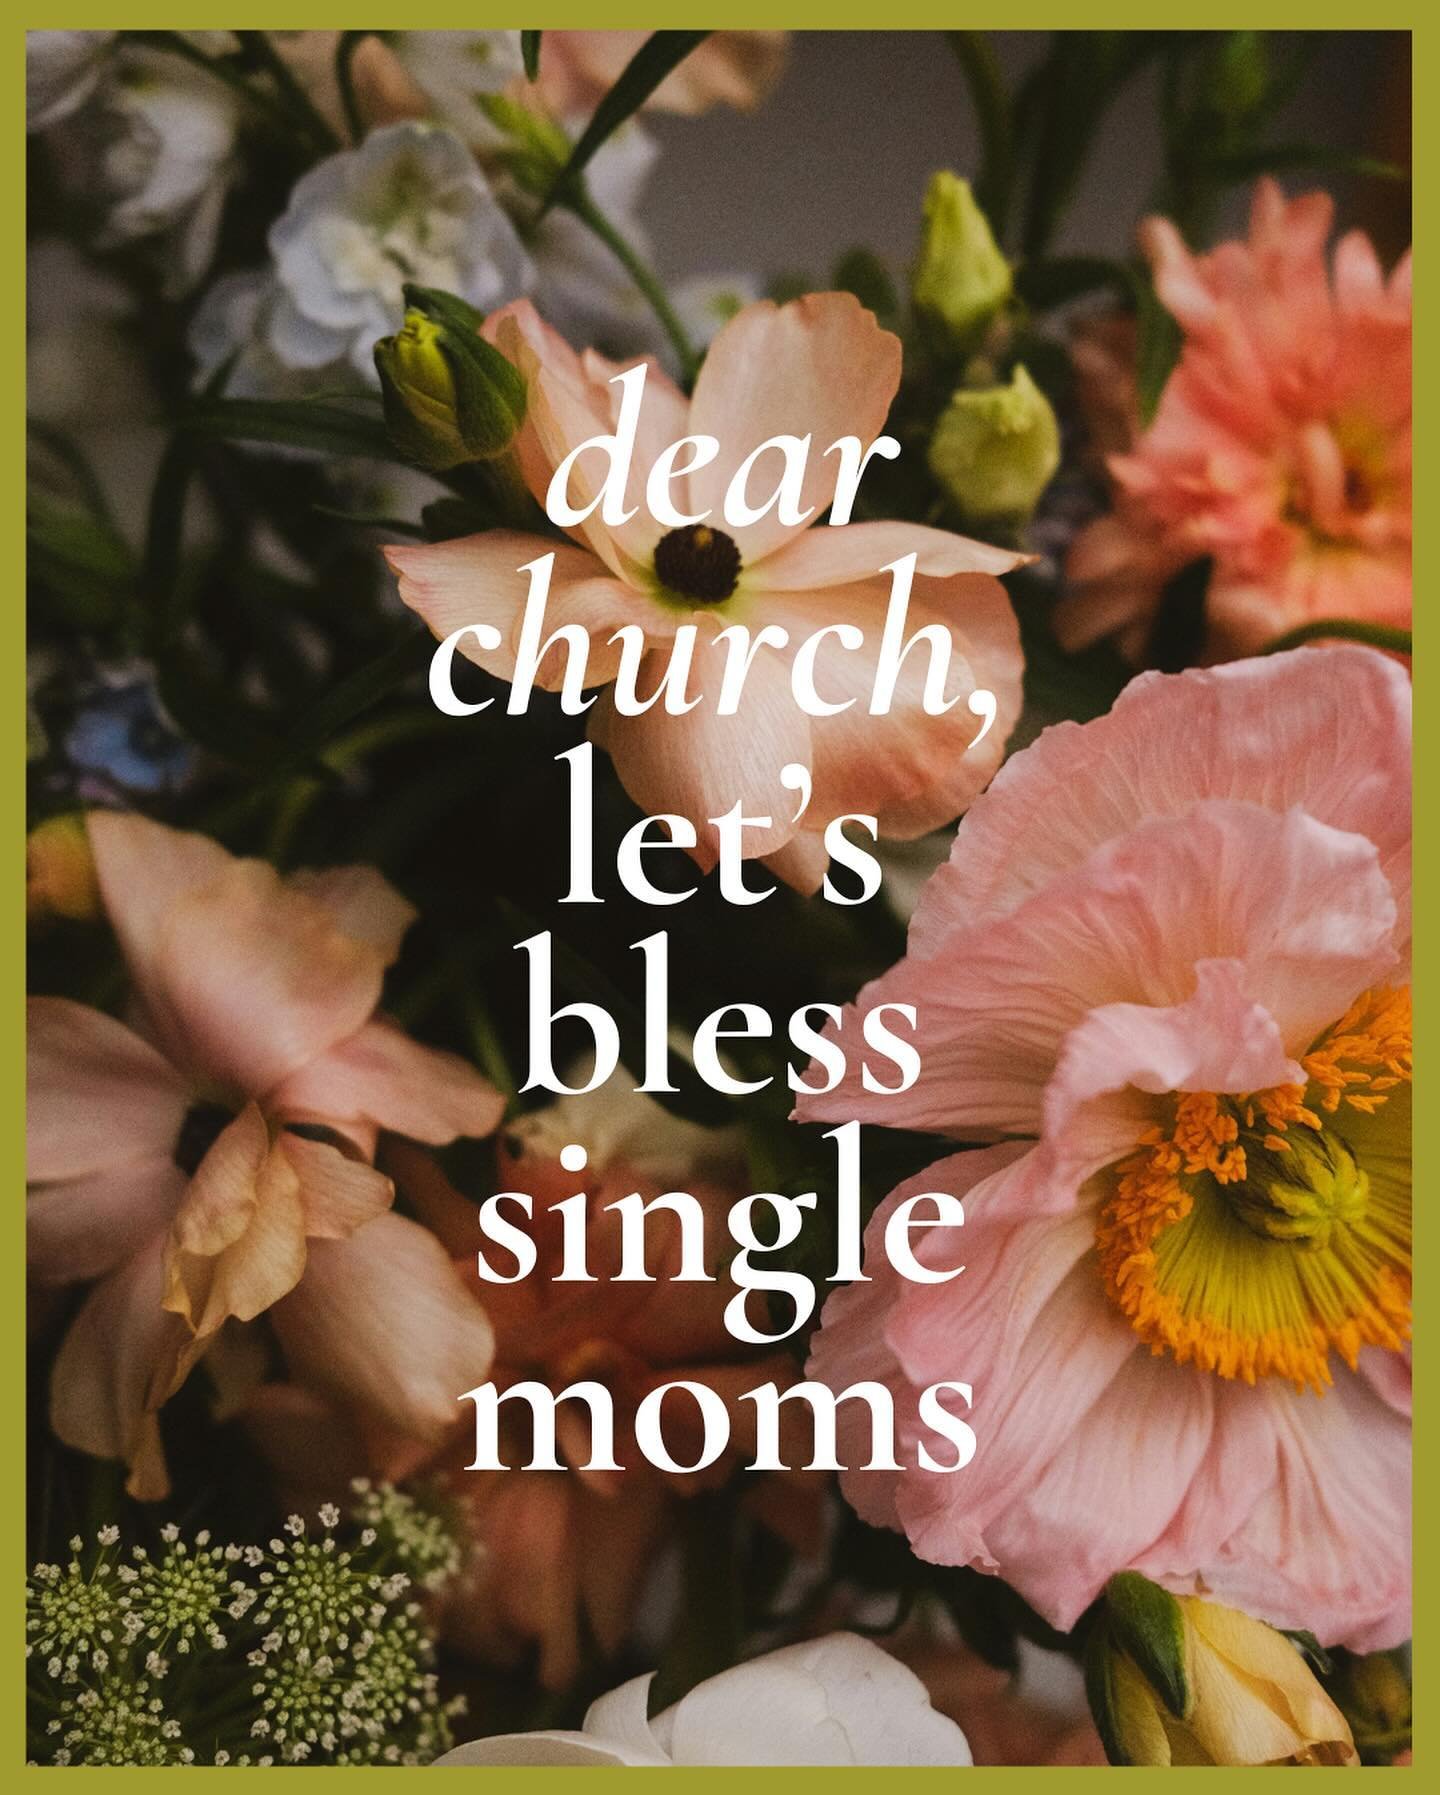 🌸 L E T &lsquo; S  B L E S S  S I N G L E  M O M S 🌸
Here at Restored Home, we think single moms &amp; mums are incredibly special! This Mother&rsquo;s Day, let&rsquo;s show them we love them, see them, and care so much for them! Over the last few 